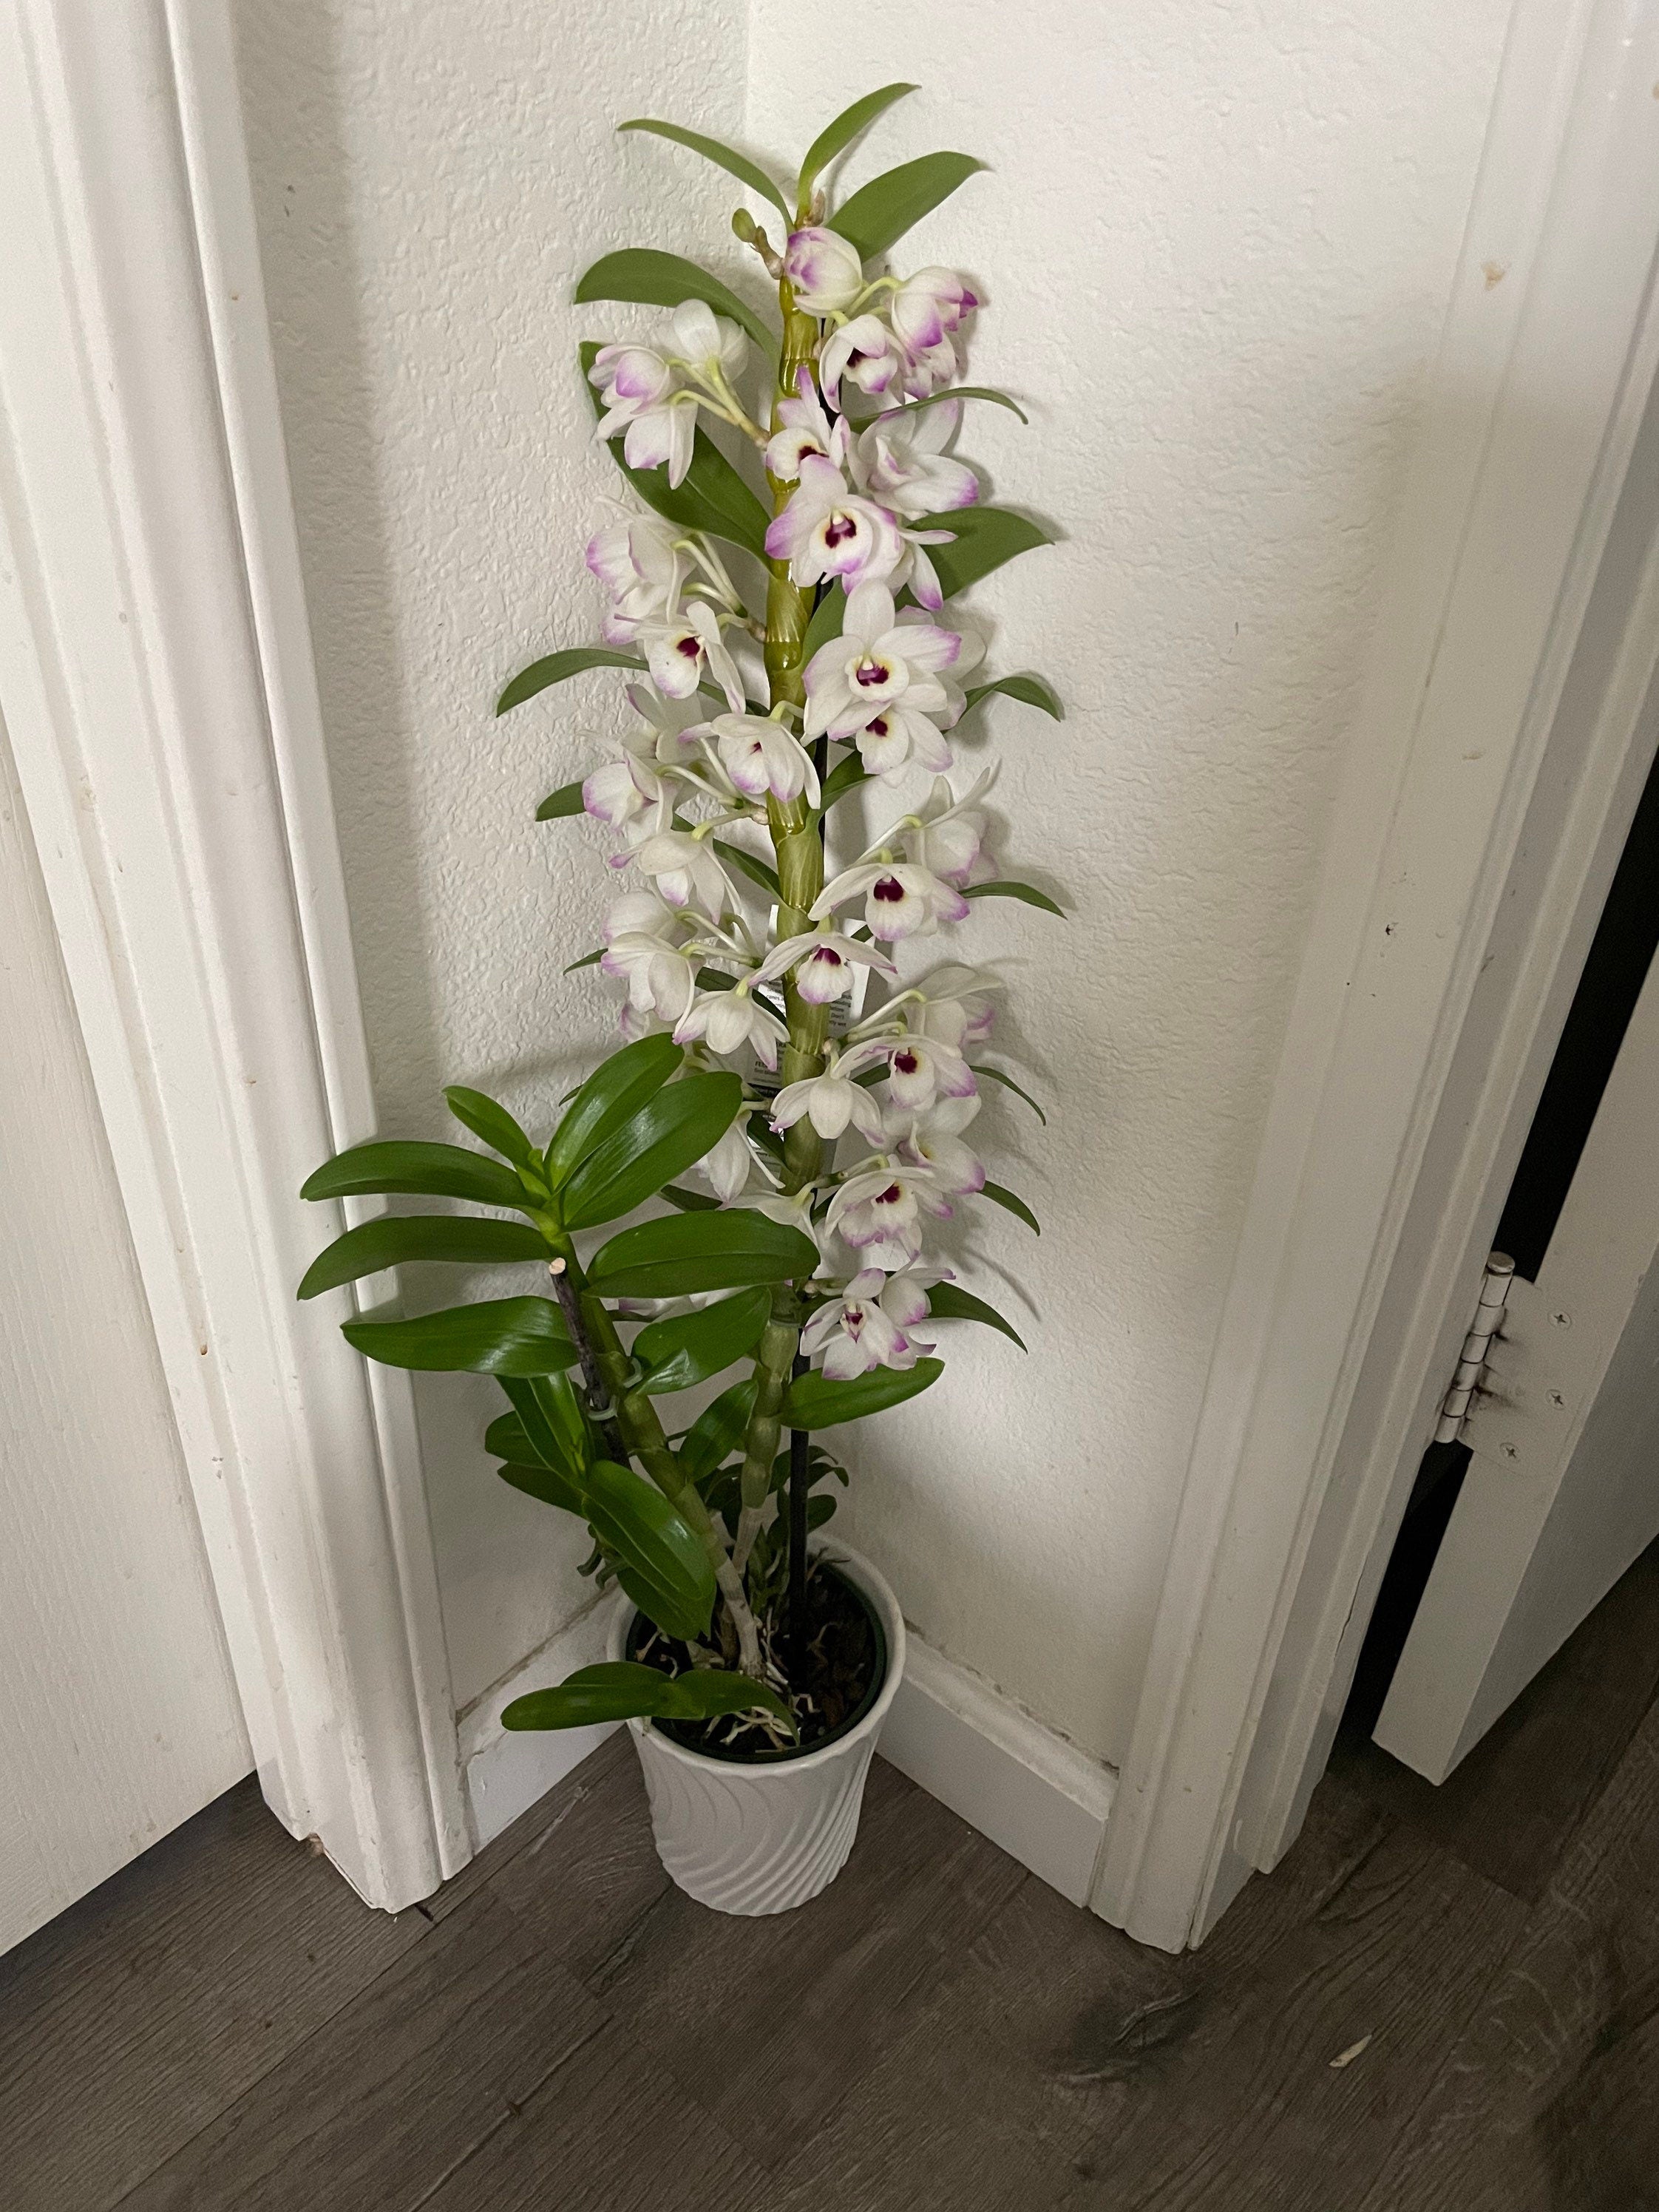 XL -1-2ft tall blooming pink and white dendrobium nobile in decorative pot. Perfect gift for the plant lover!-not exact plant -color vary